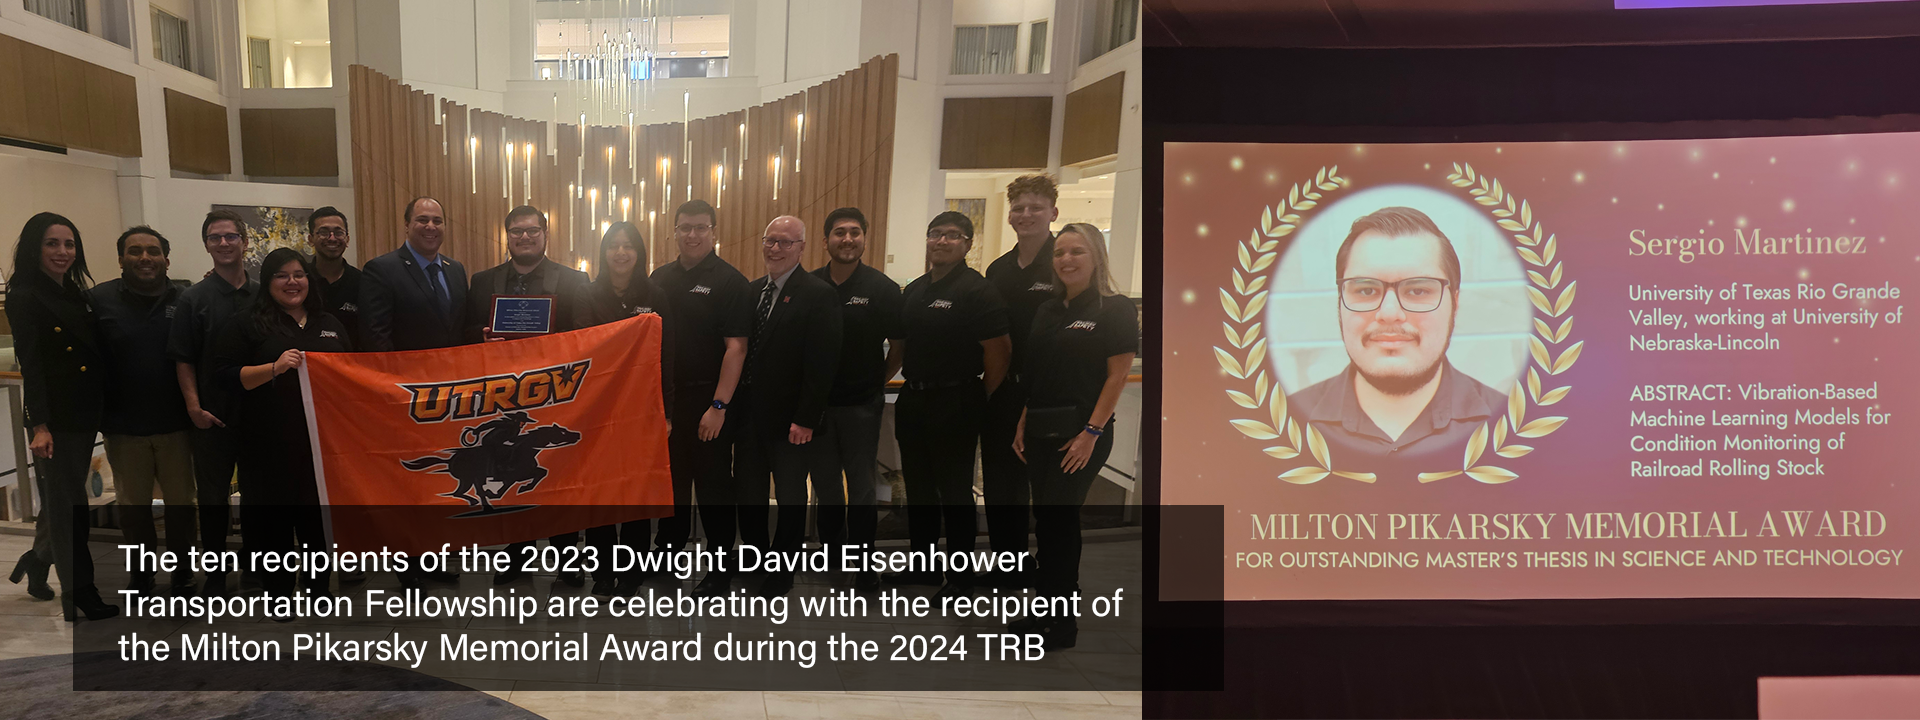 The ten recipients of the 2023 Dwight David Eisenhower Transportation Fellowship are celebrating with the recipient of the Milton Pikarsky Memorial Award during the 2024 TRB